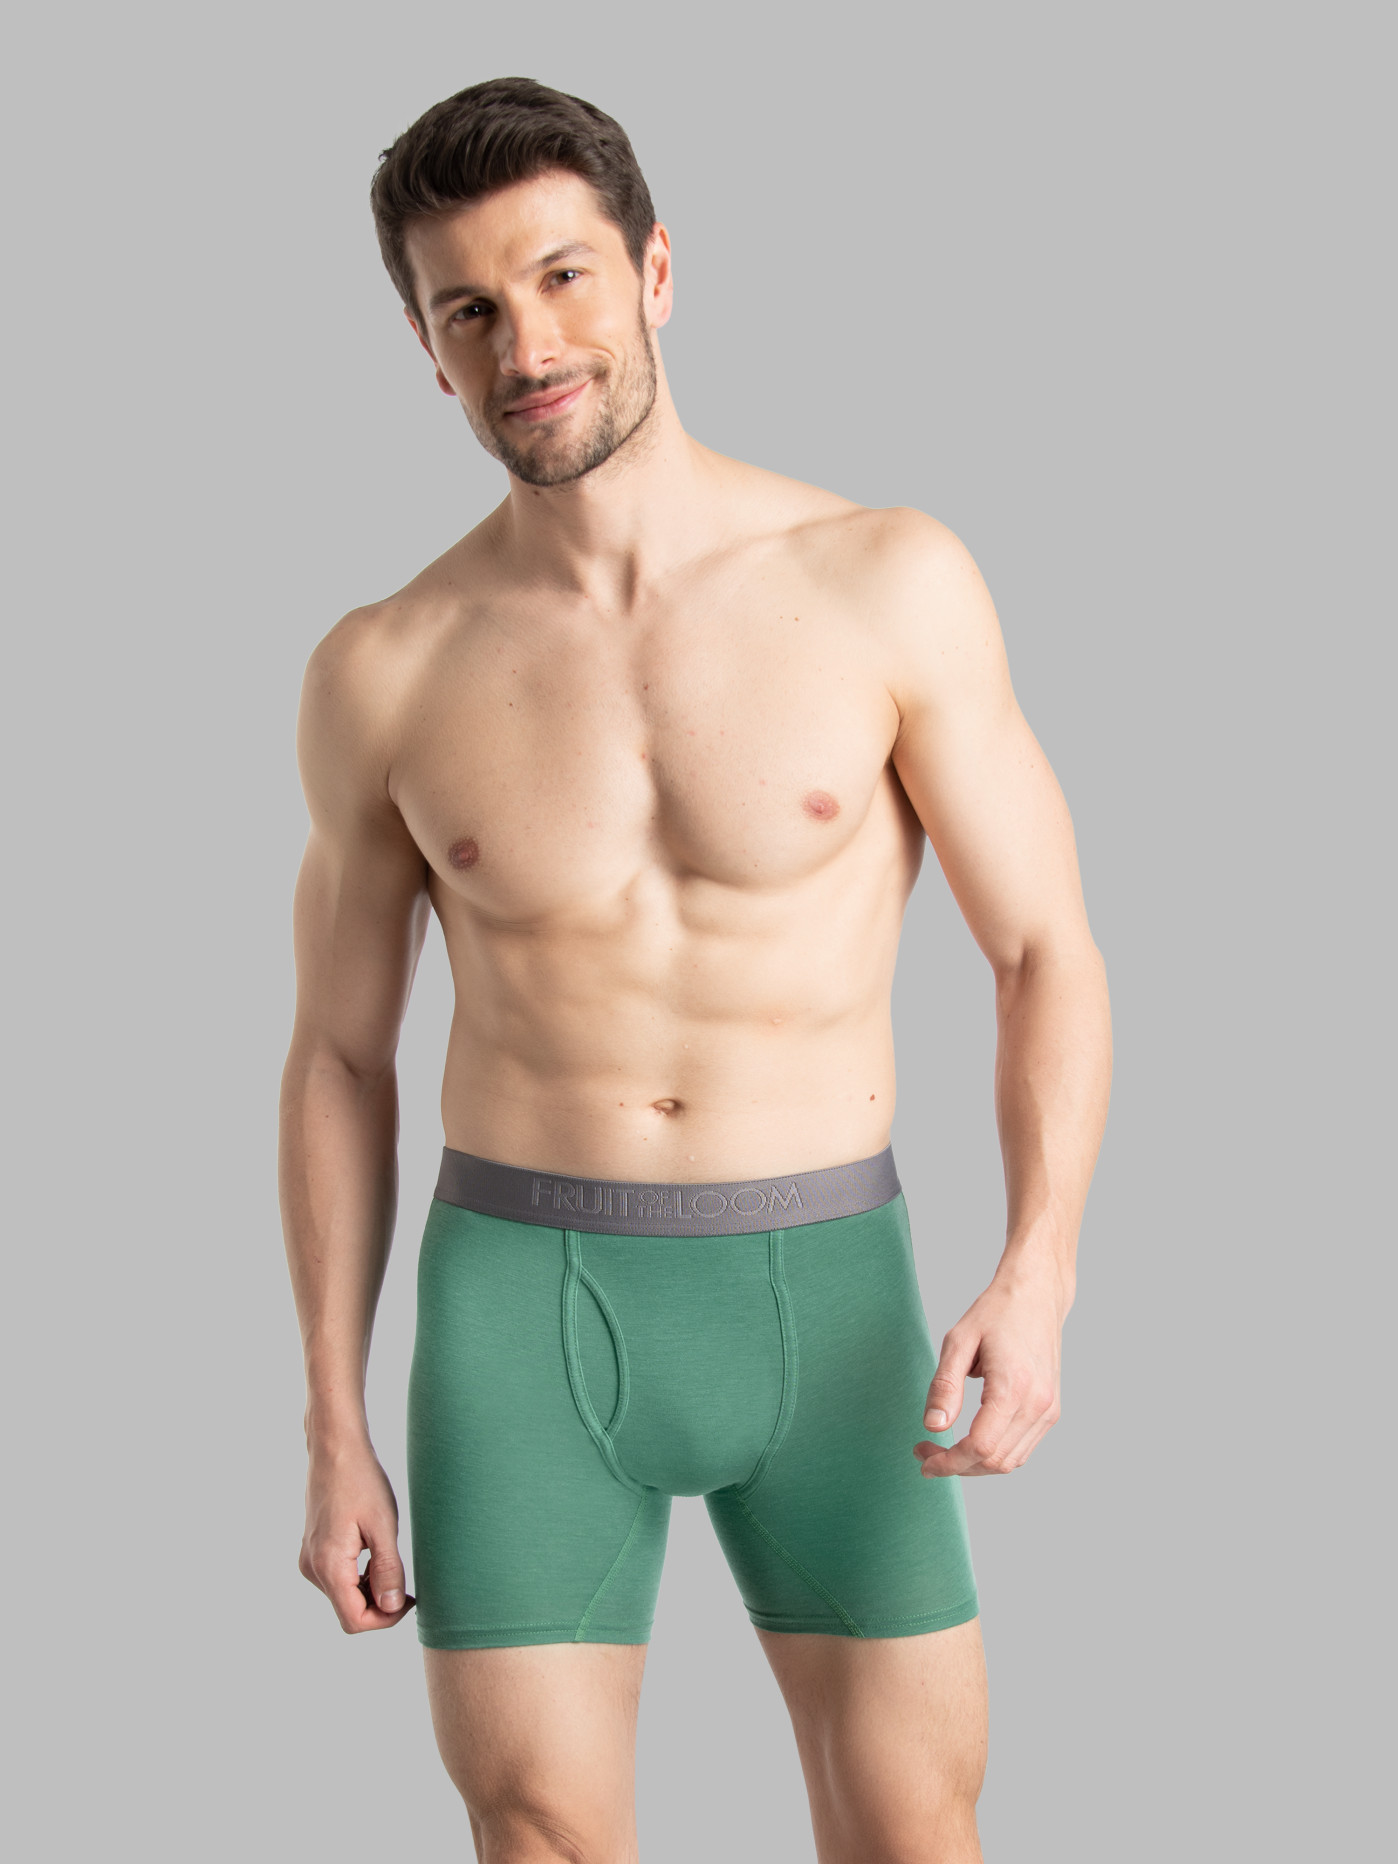 Fruit of the Loom, Underwear & Socks, New Fruit Of The Loom Mens 6pack  Tagfree Briefs Size Xl